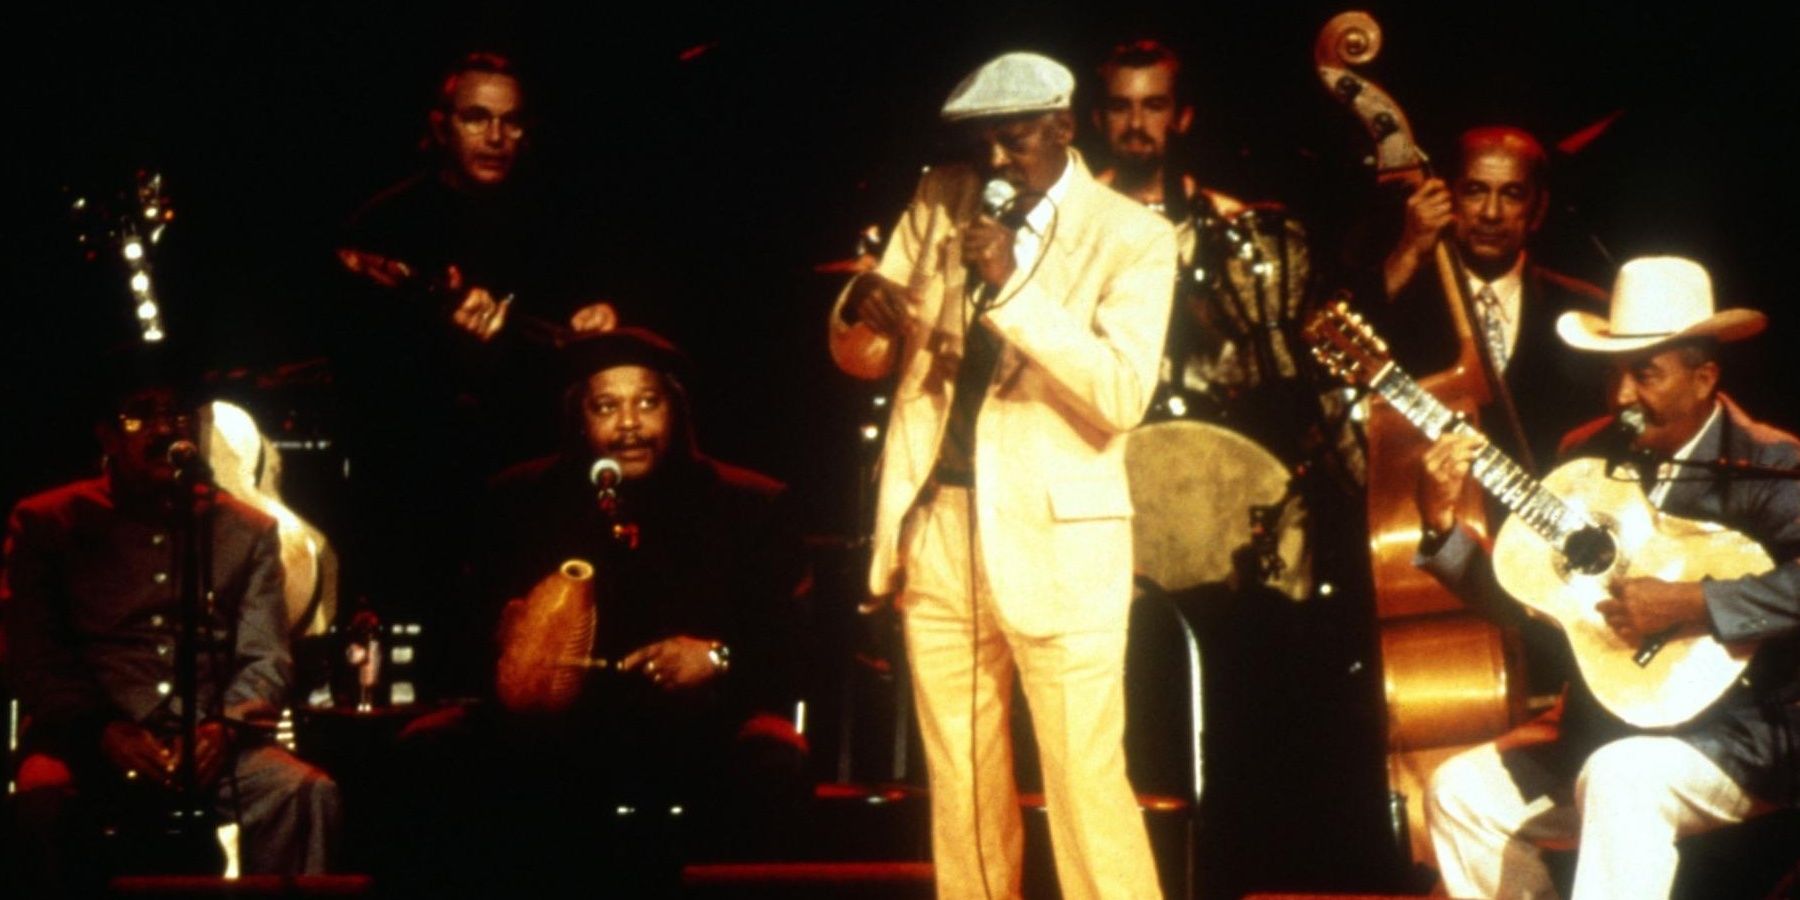 A group of Cuban musicians performing on stage in a still from Buena Vista Social Club 